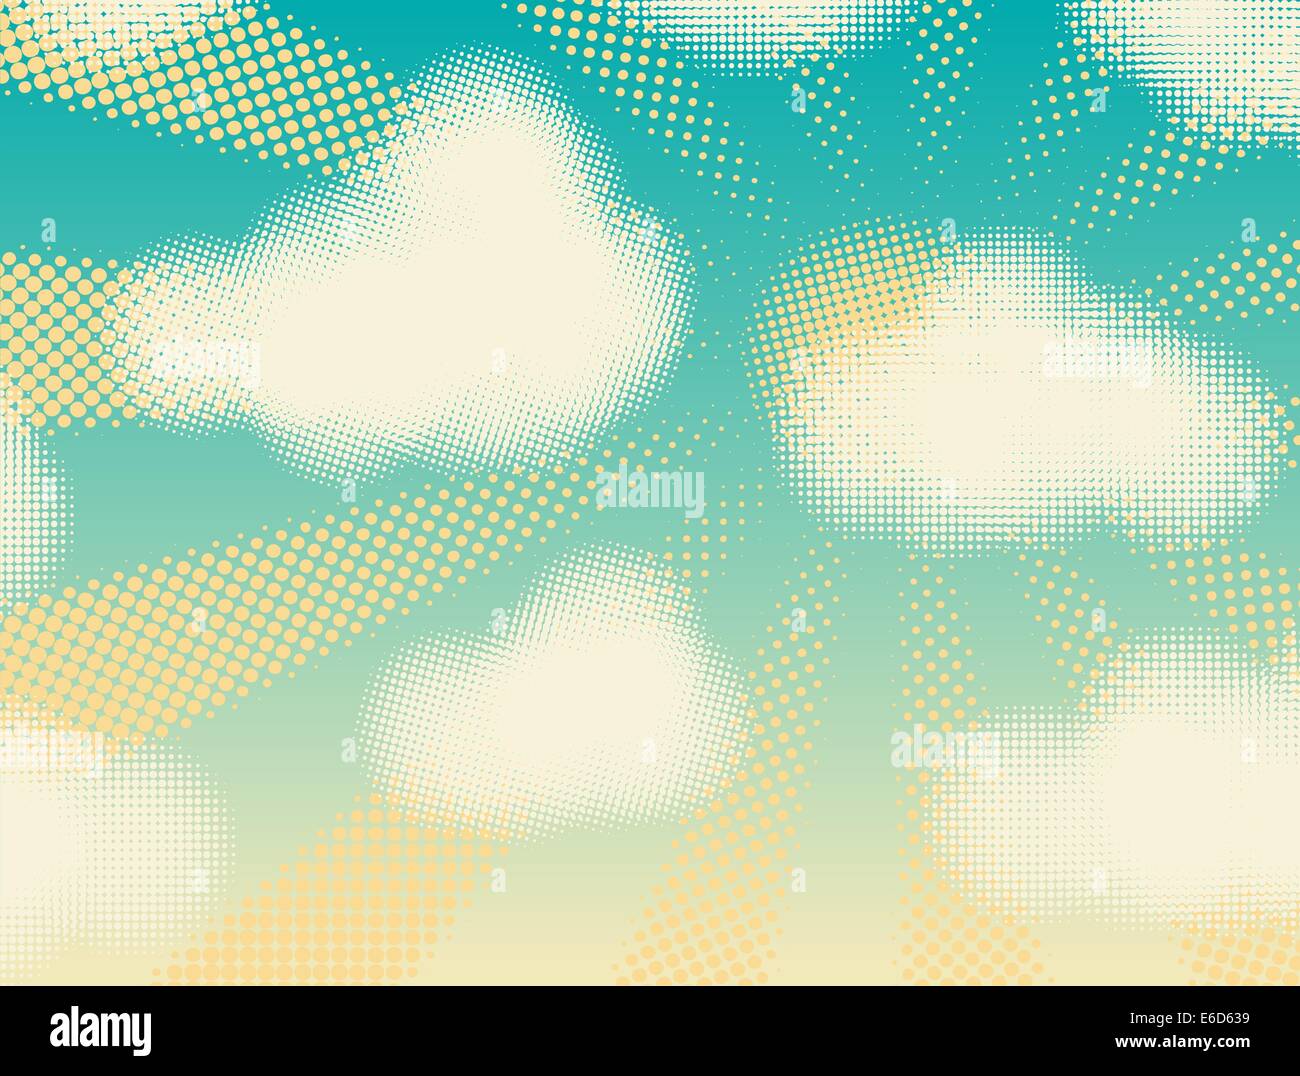 Editable vector design of halftone cumulus clouds and sunshine Stock Vector